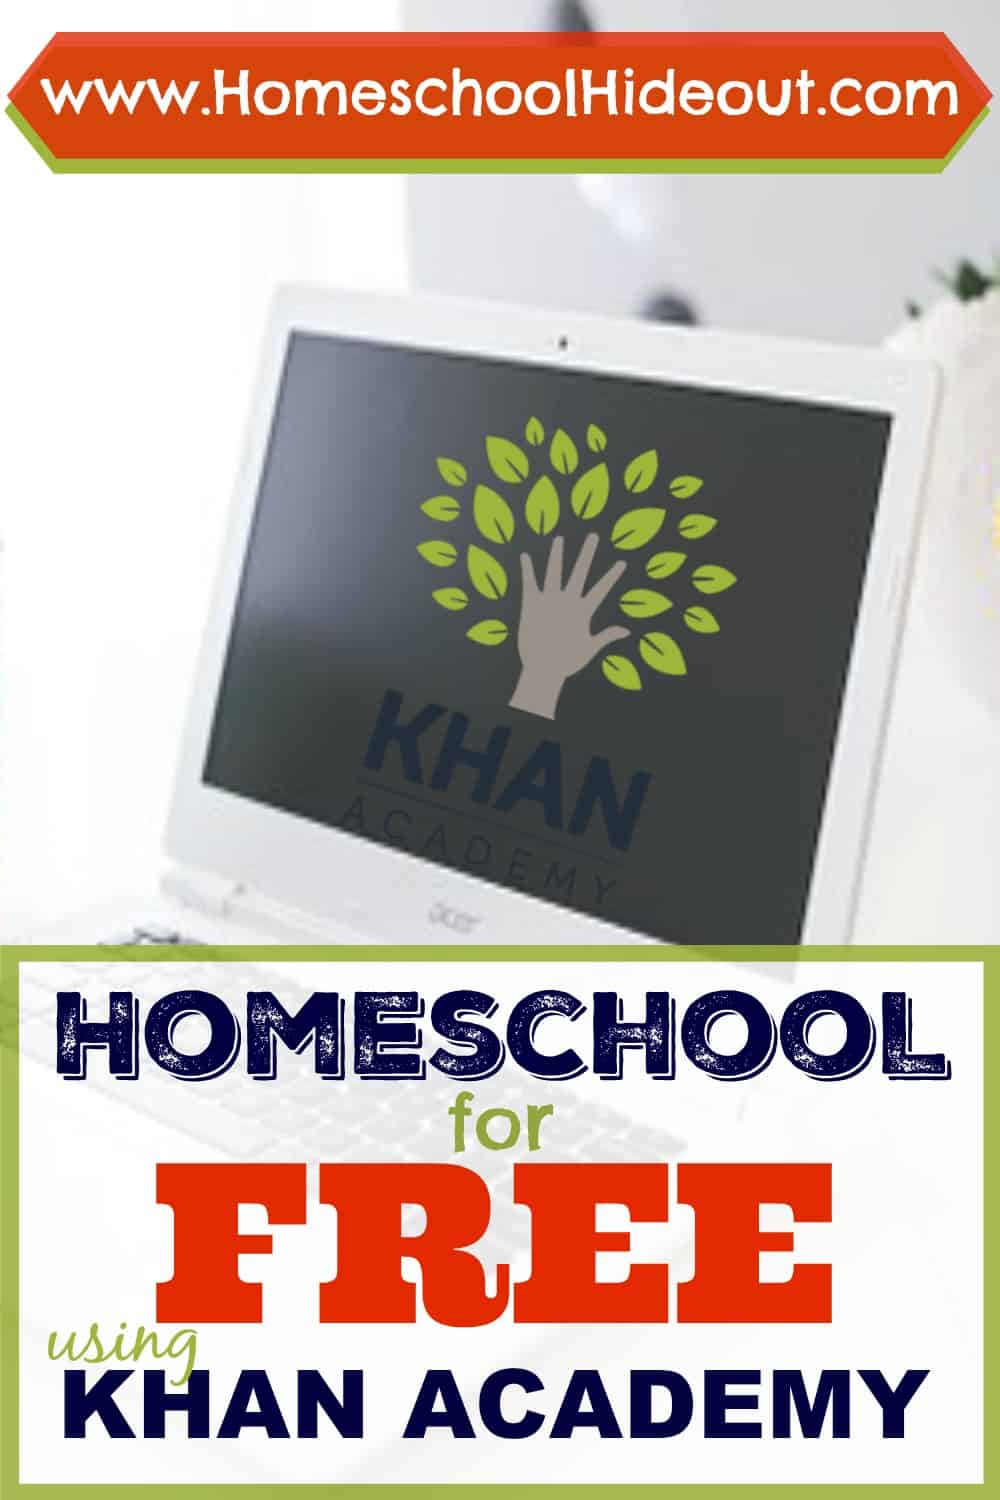 Using Khan Academy in your homeschool is a great idea!